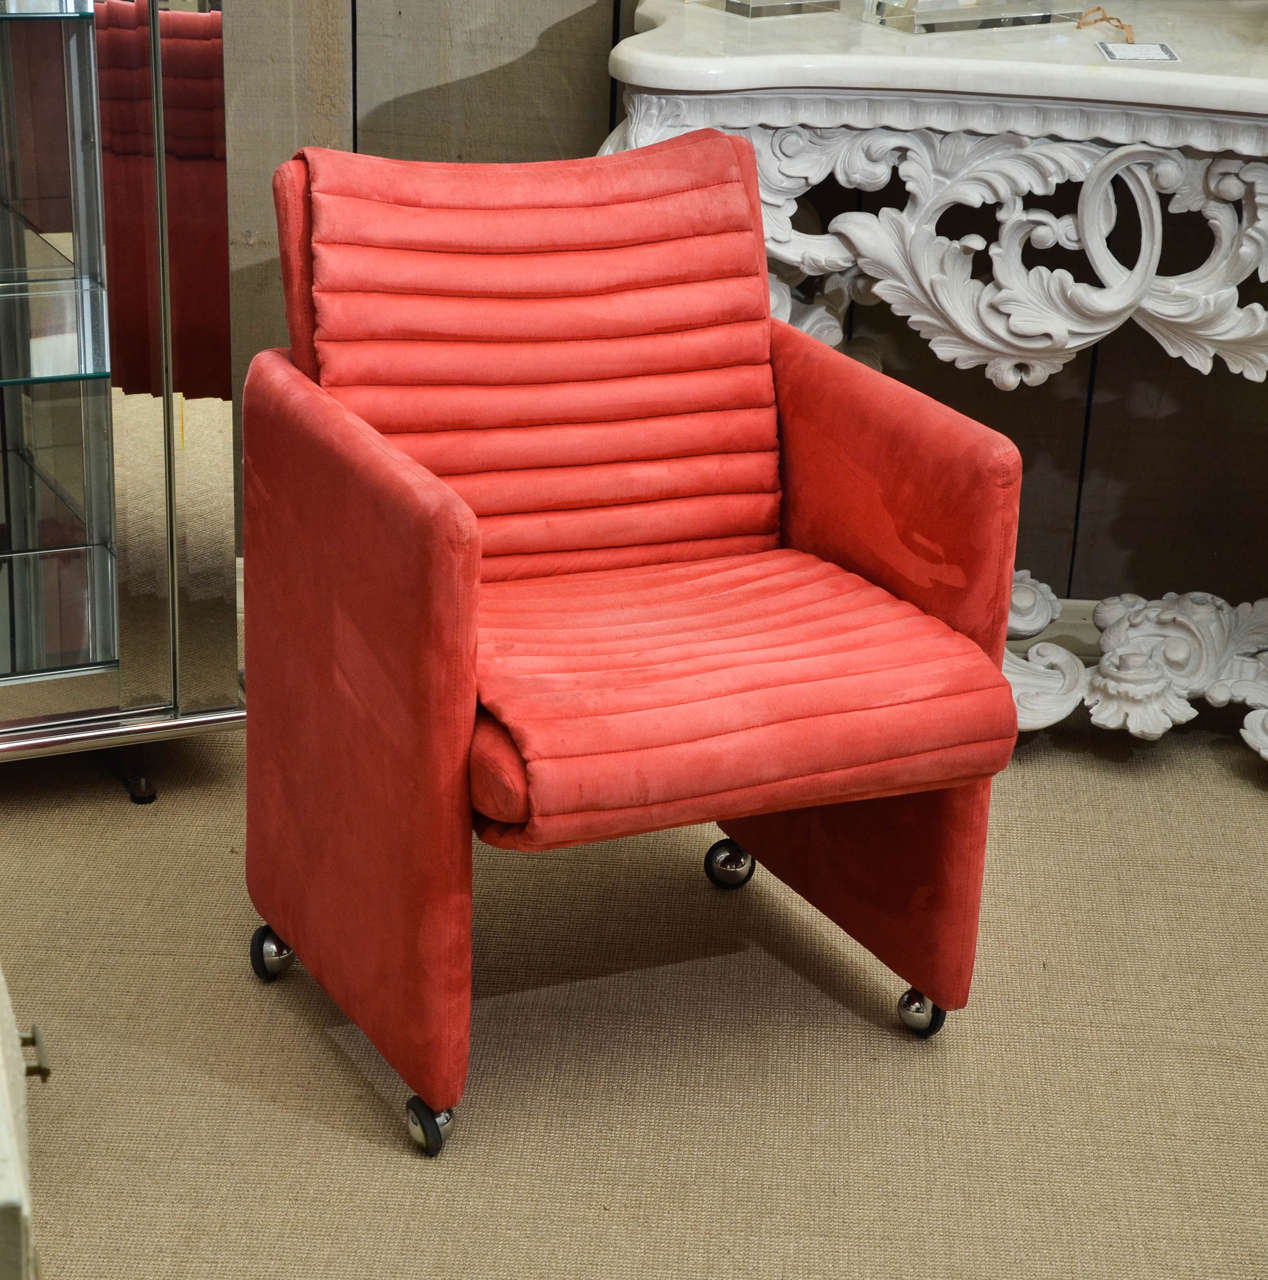 Striking pair of coral suede channel quilted arm chairs on castors by Milo Baughman for Thayer Coggin